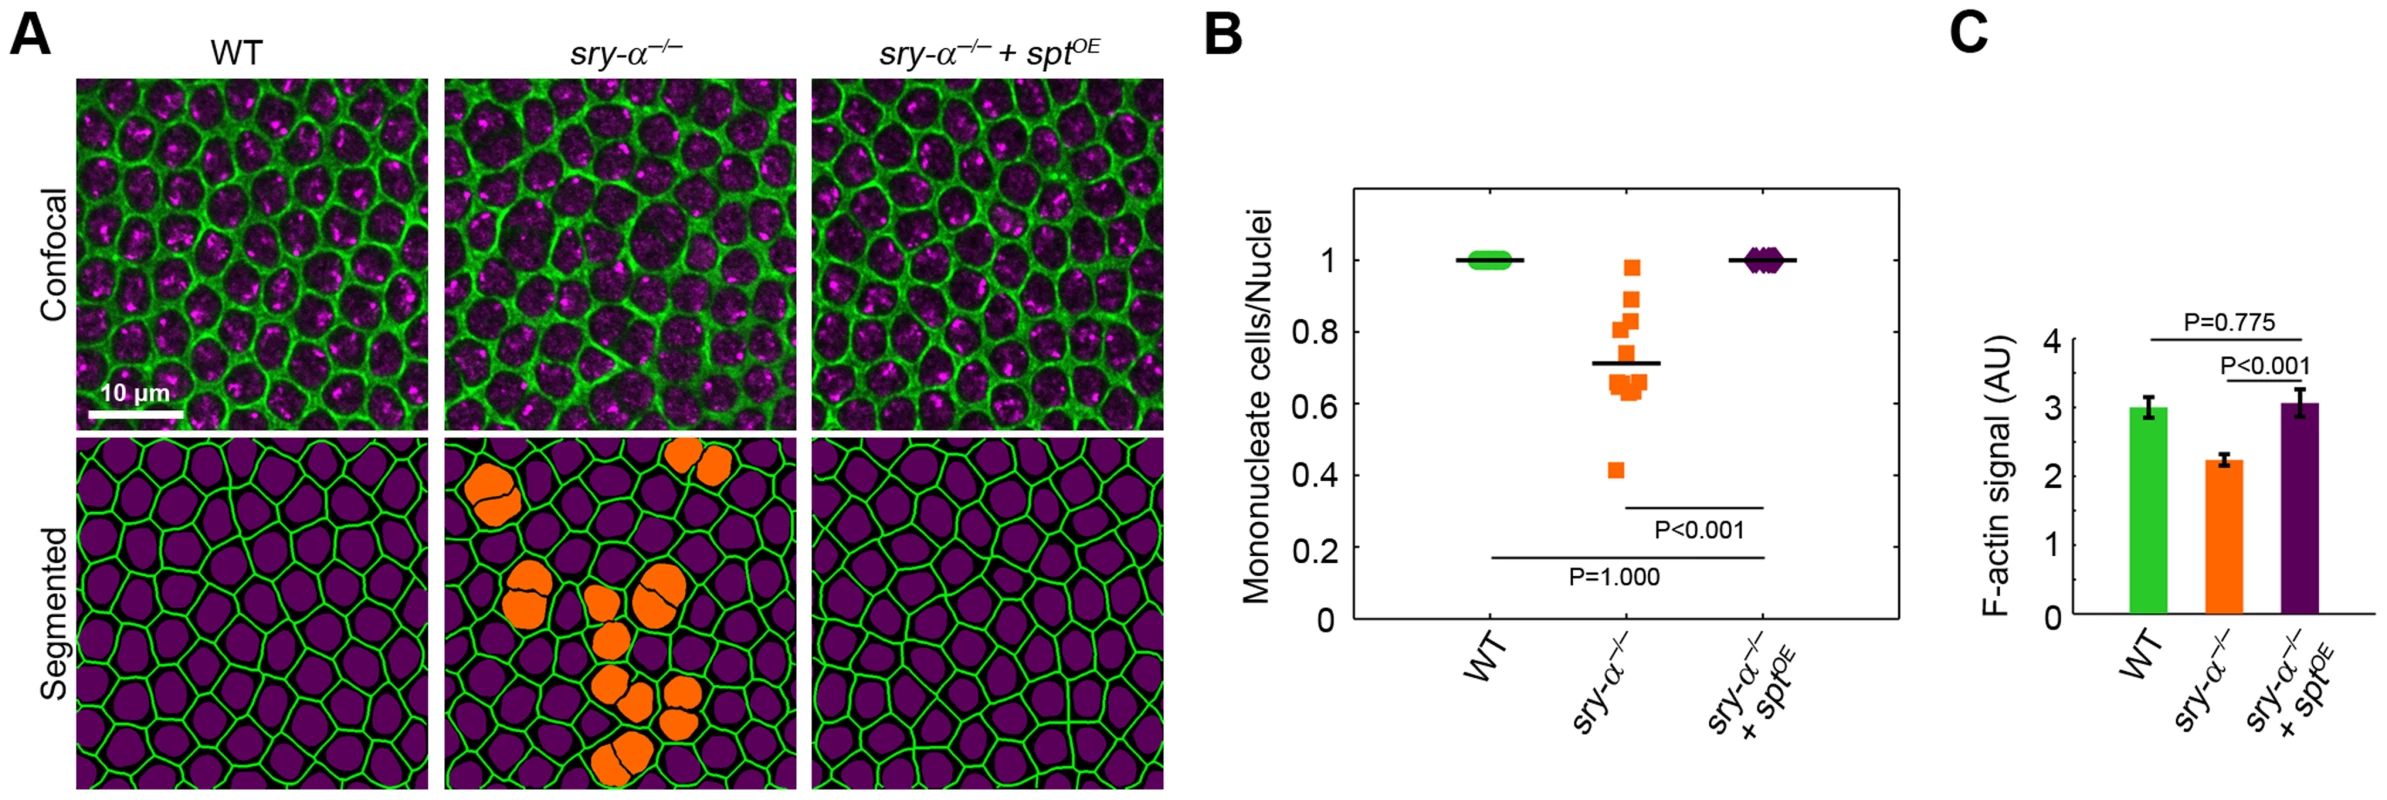 Sry-α and Spt share redundant function during cellularization.